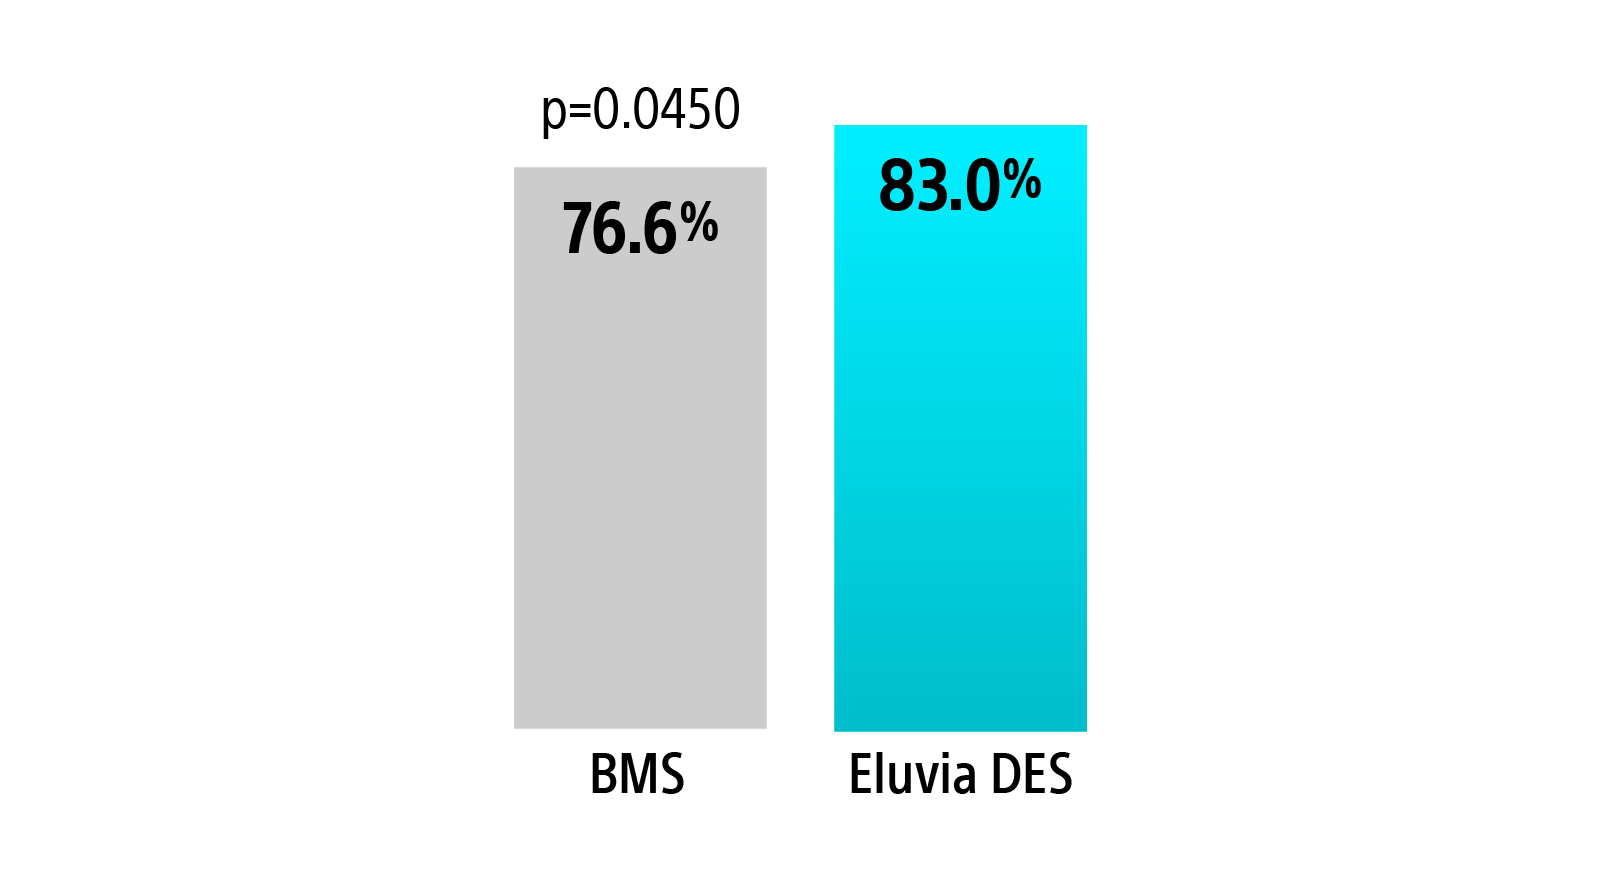 Eluvia demonstrated sustained clinical improvement